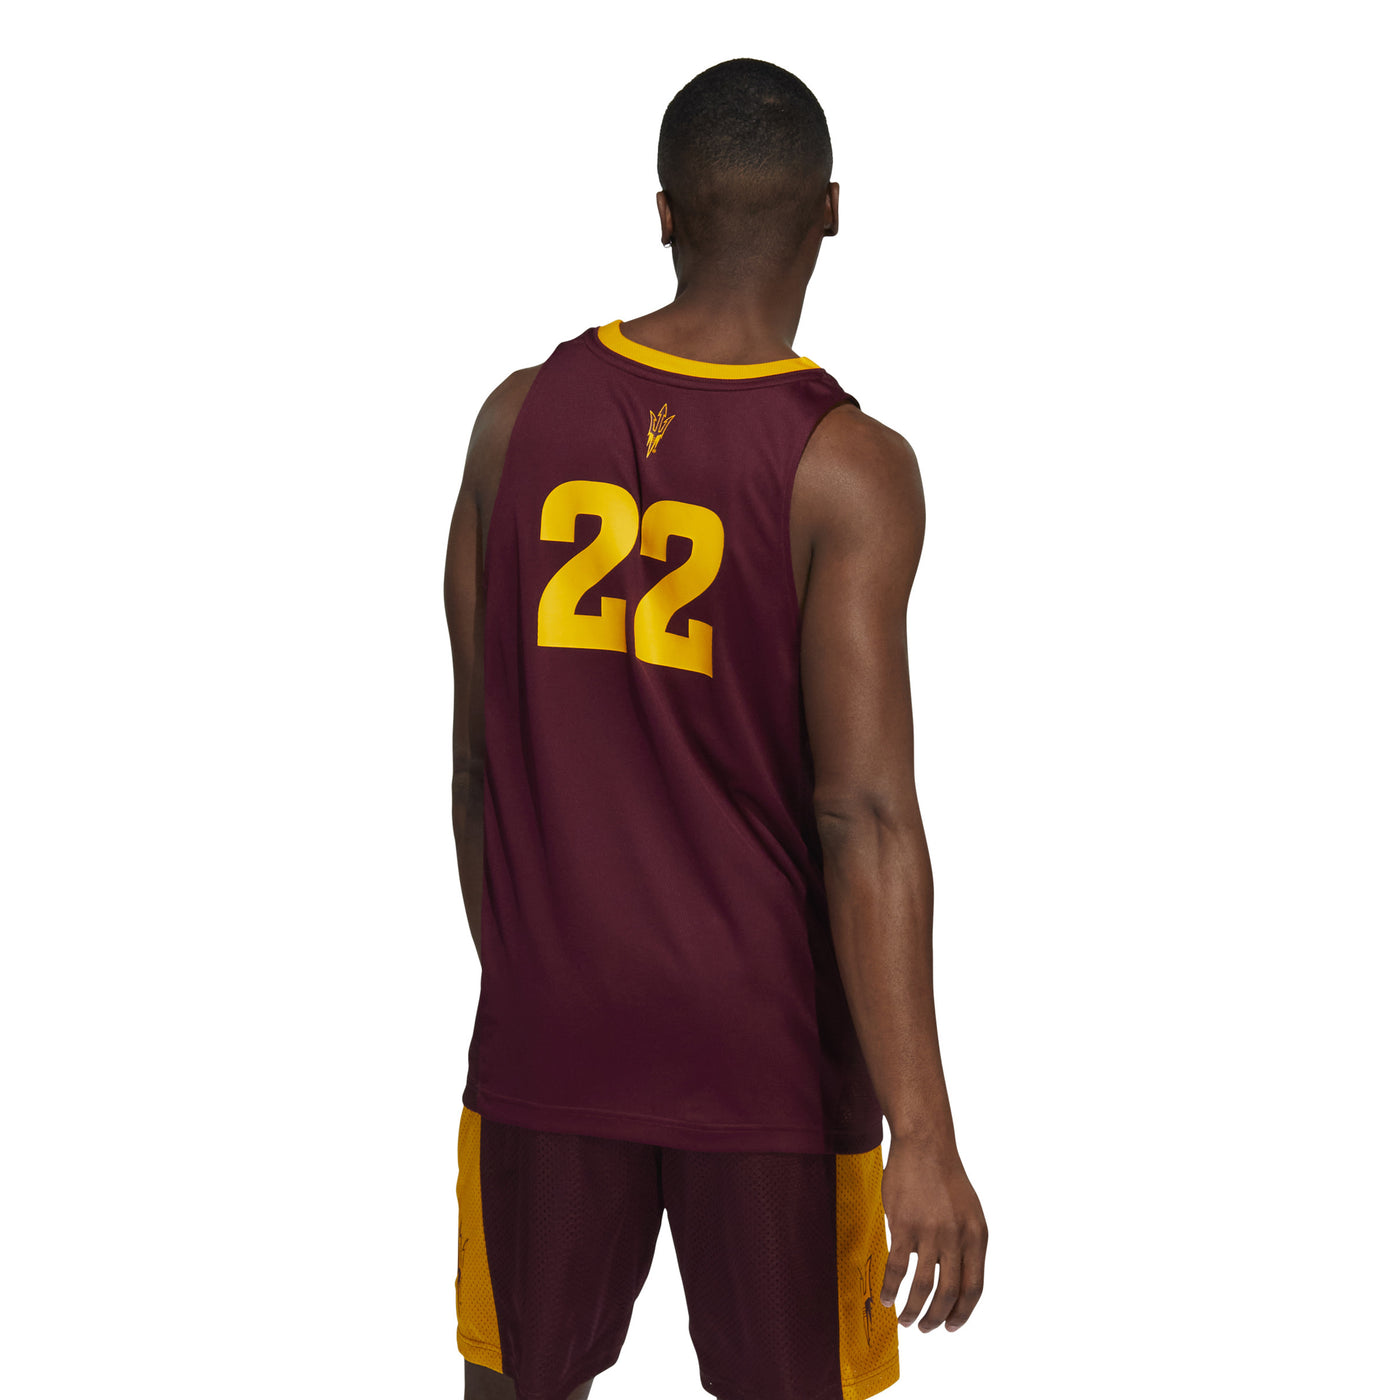 Backside on ASU maroon jersey with the number 22 in gold and a small outline of a pitchfork in gold above the number.